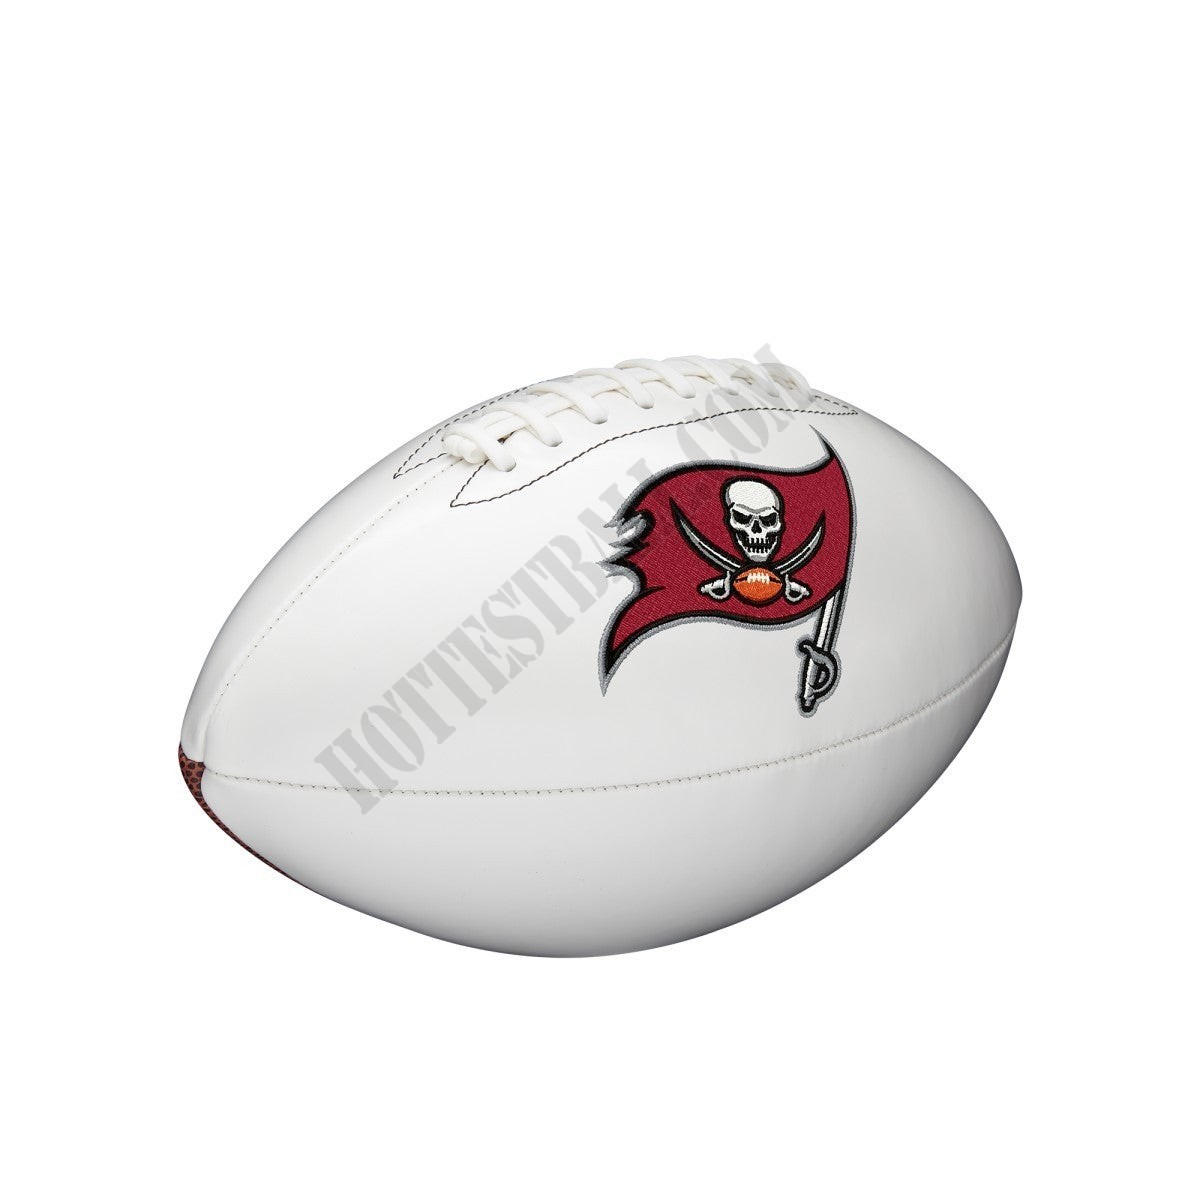 NFL Live Signature Autograph Football - Tampa Bay Buccaneers ● Wilson Promotions - -3